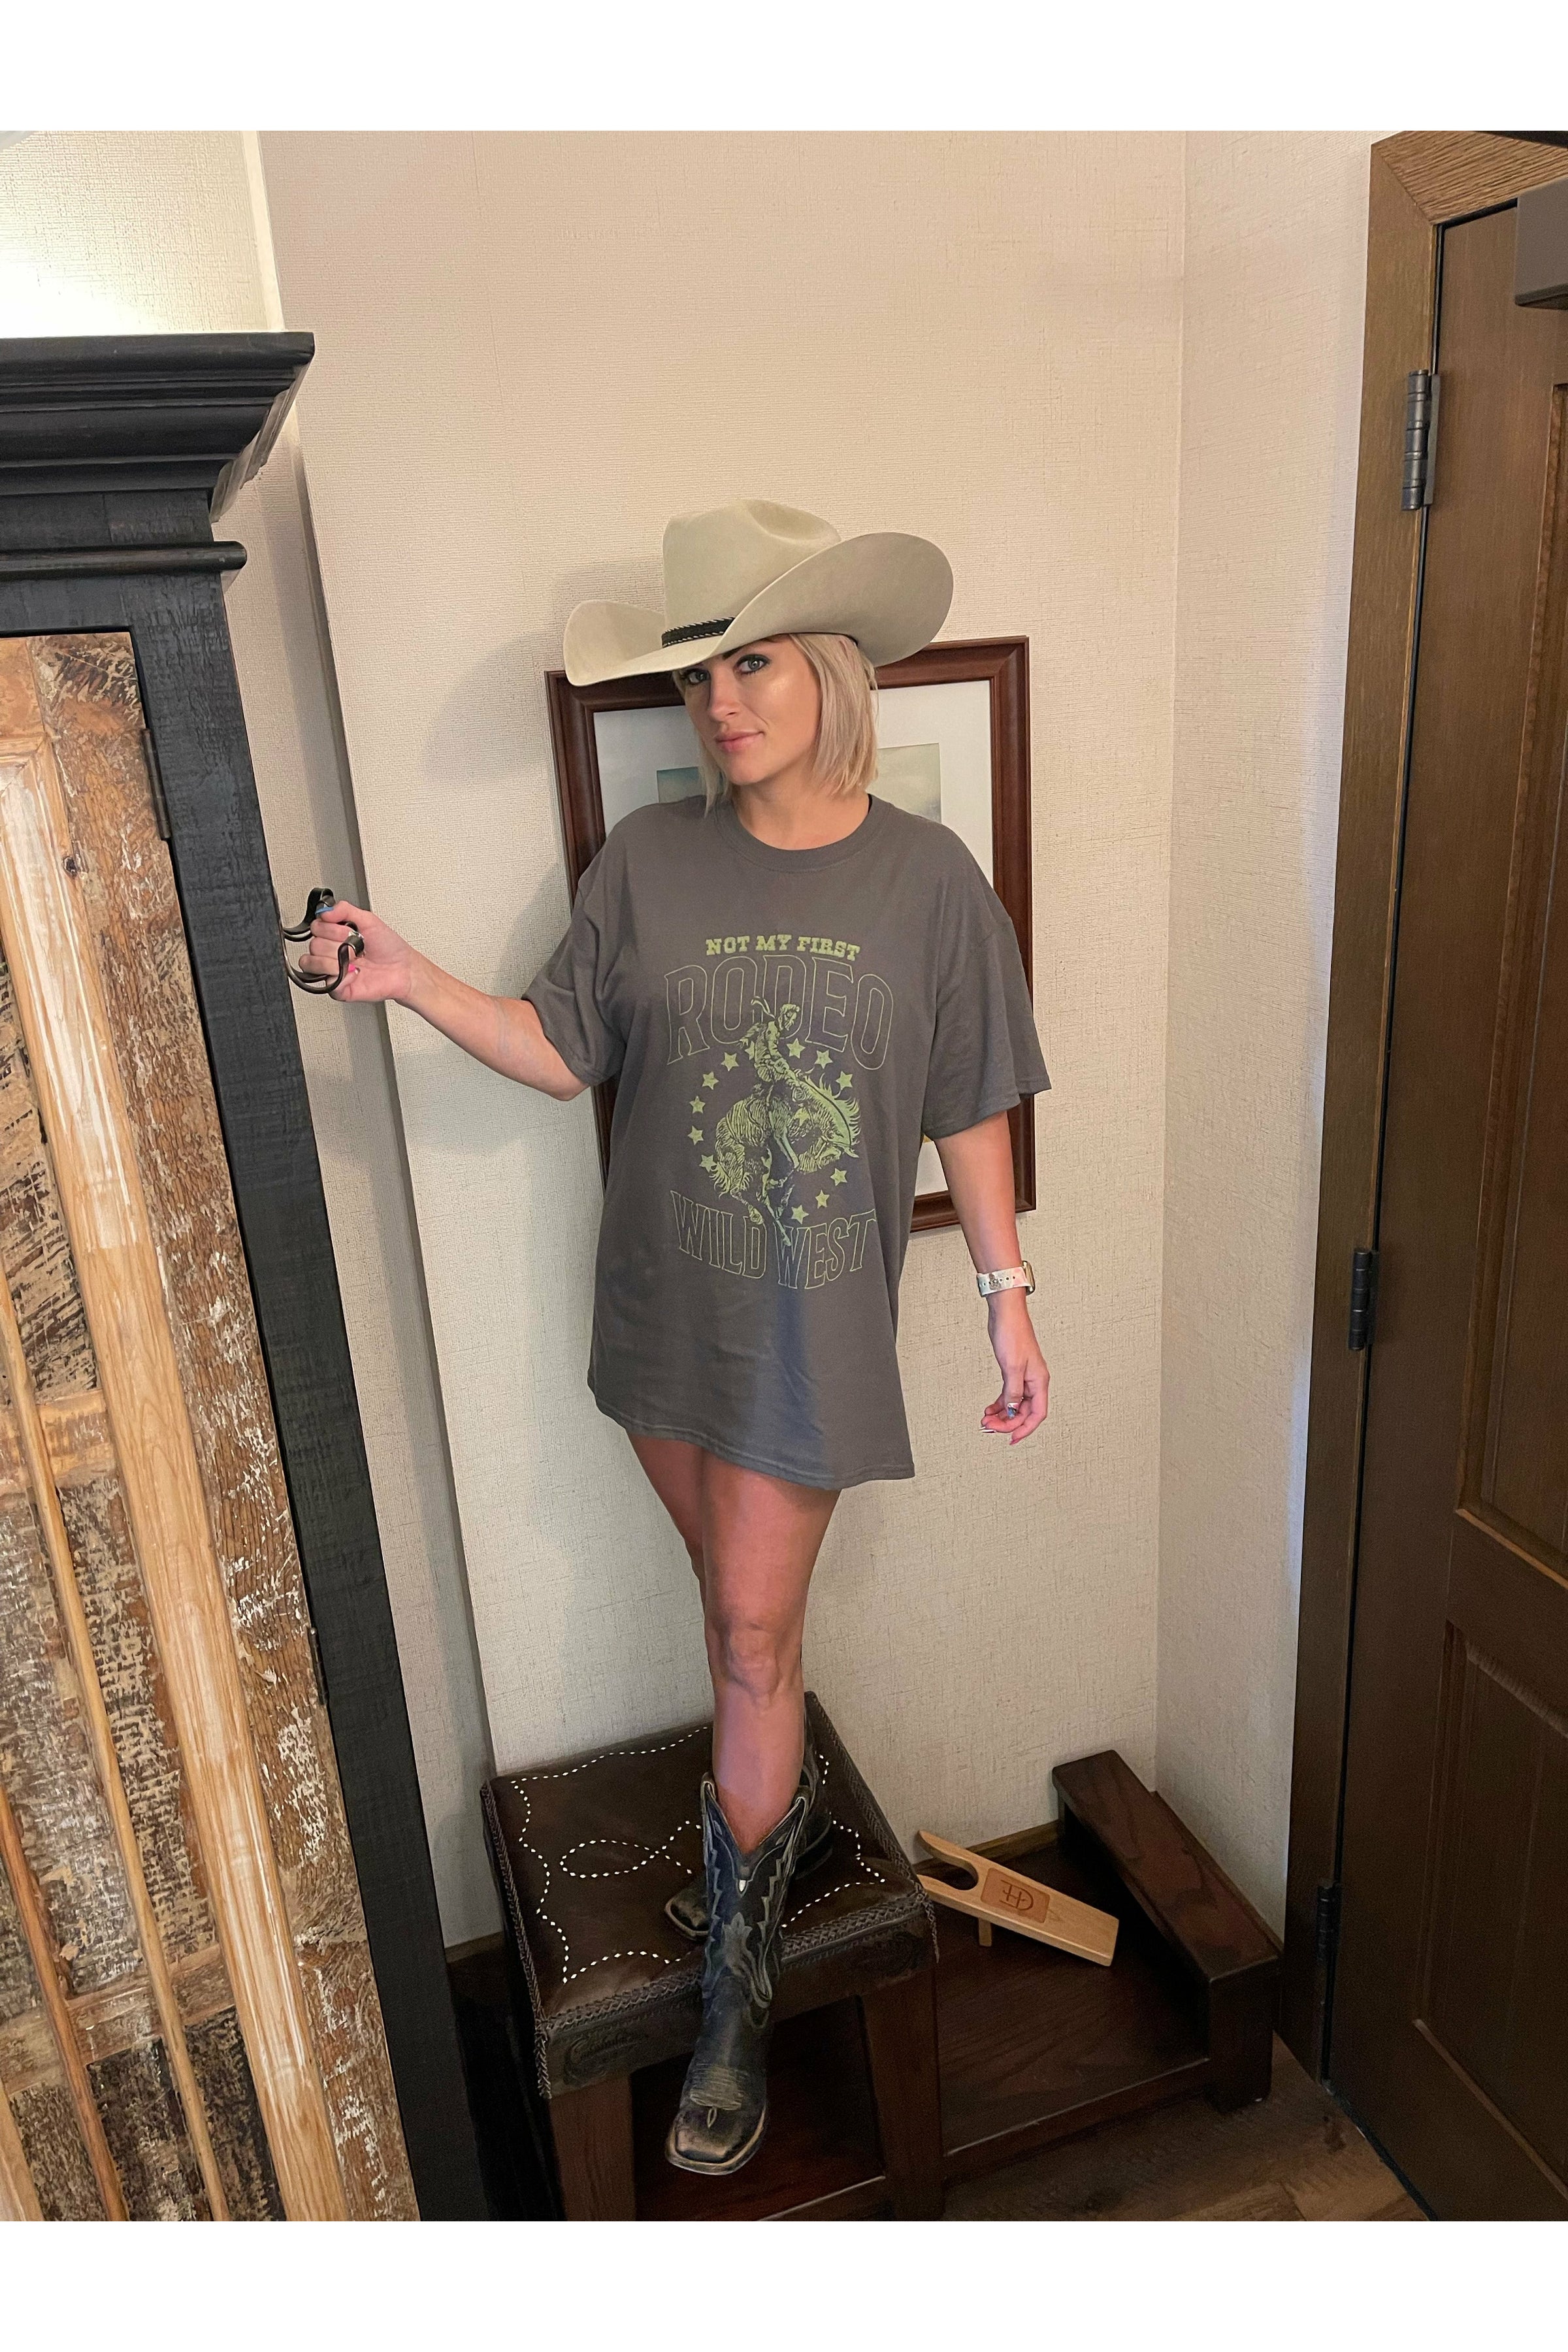 Not My First Rodeo Oversized Tee